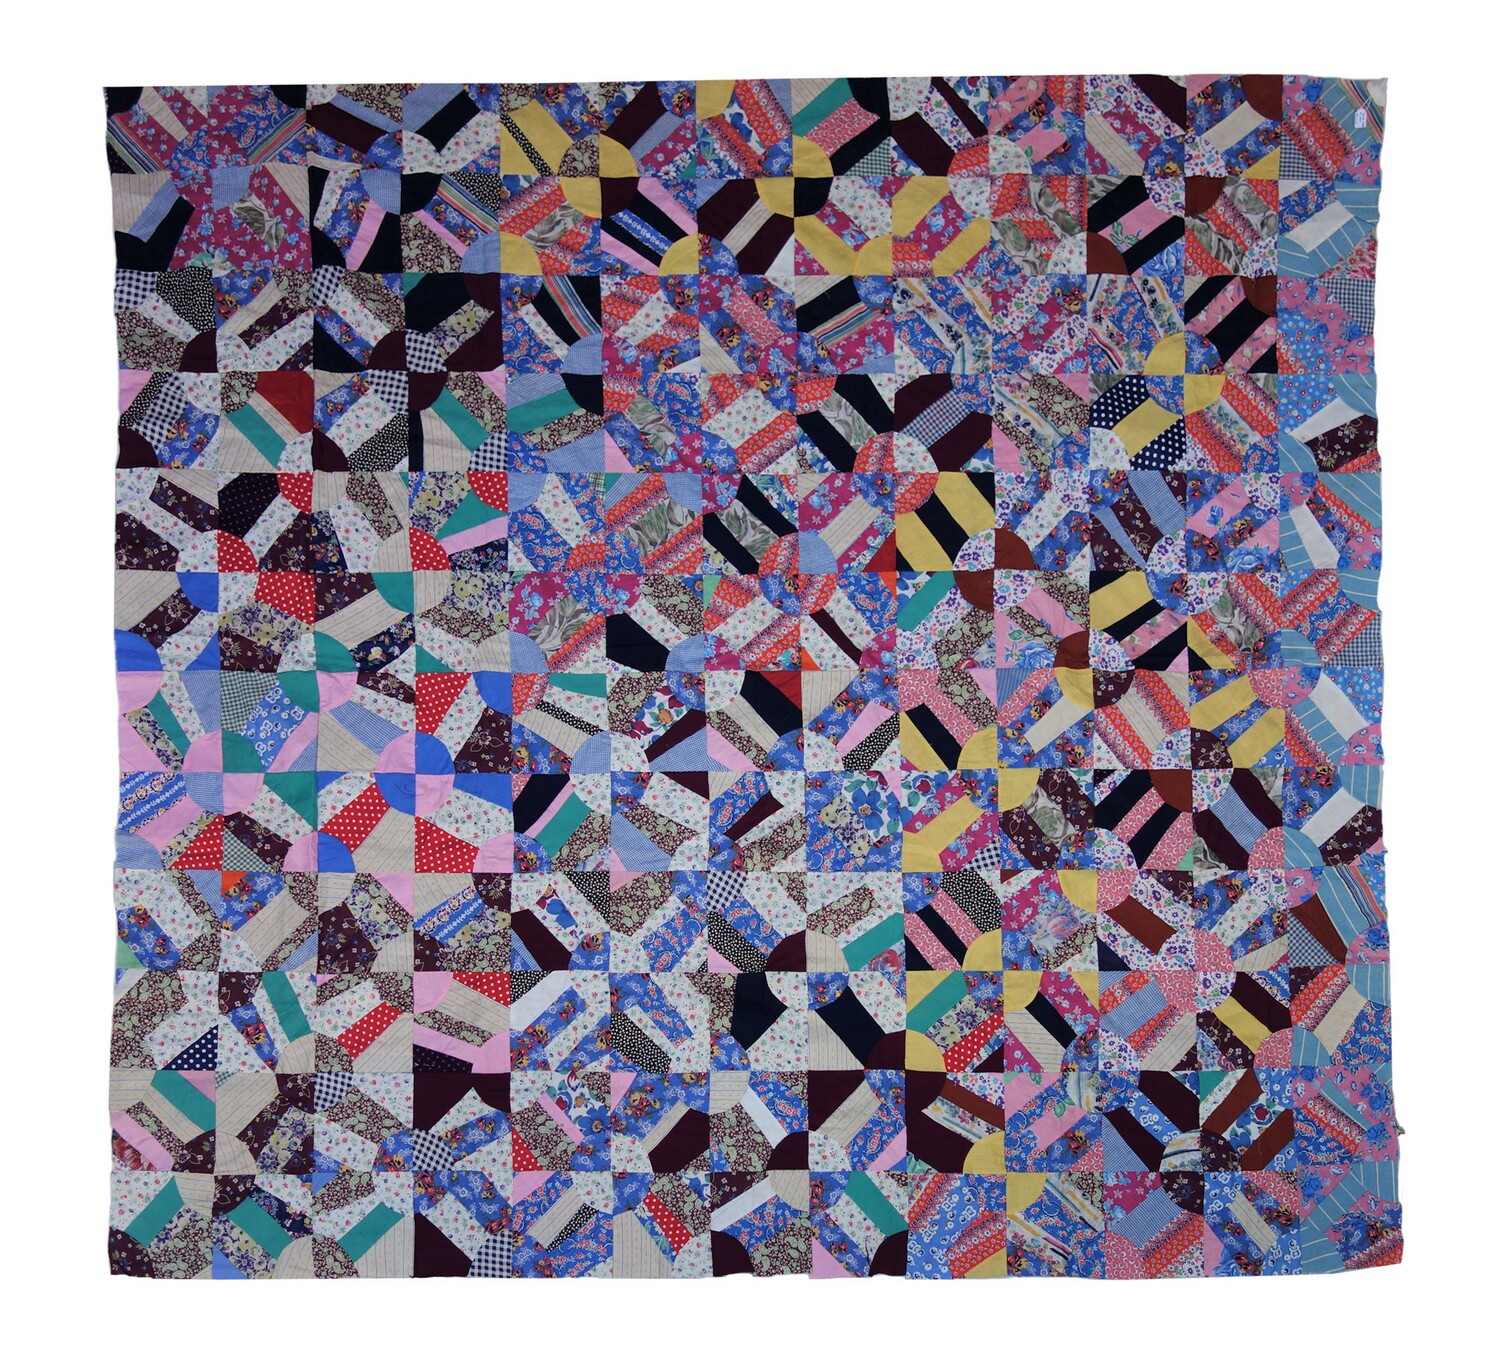 Quilt worked on pieces from the 1941 Sears Roebuck catalogue (TRC 2018.3129).